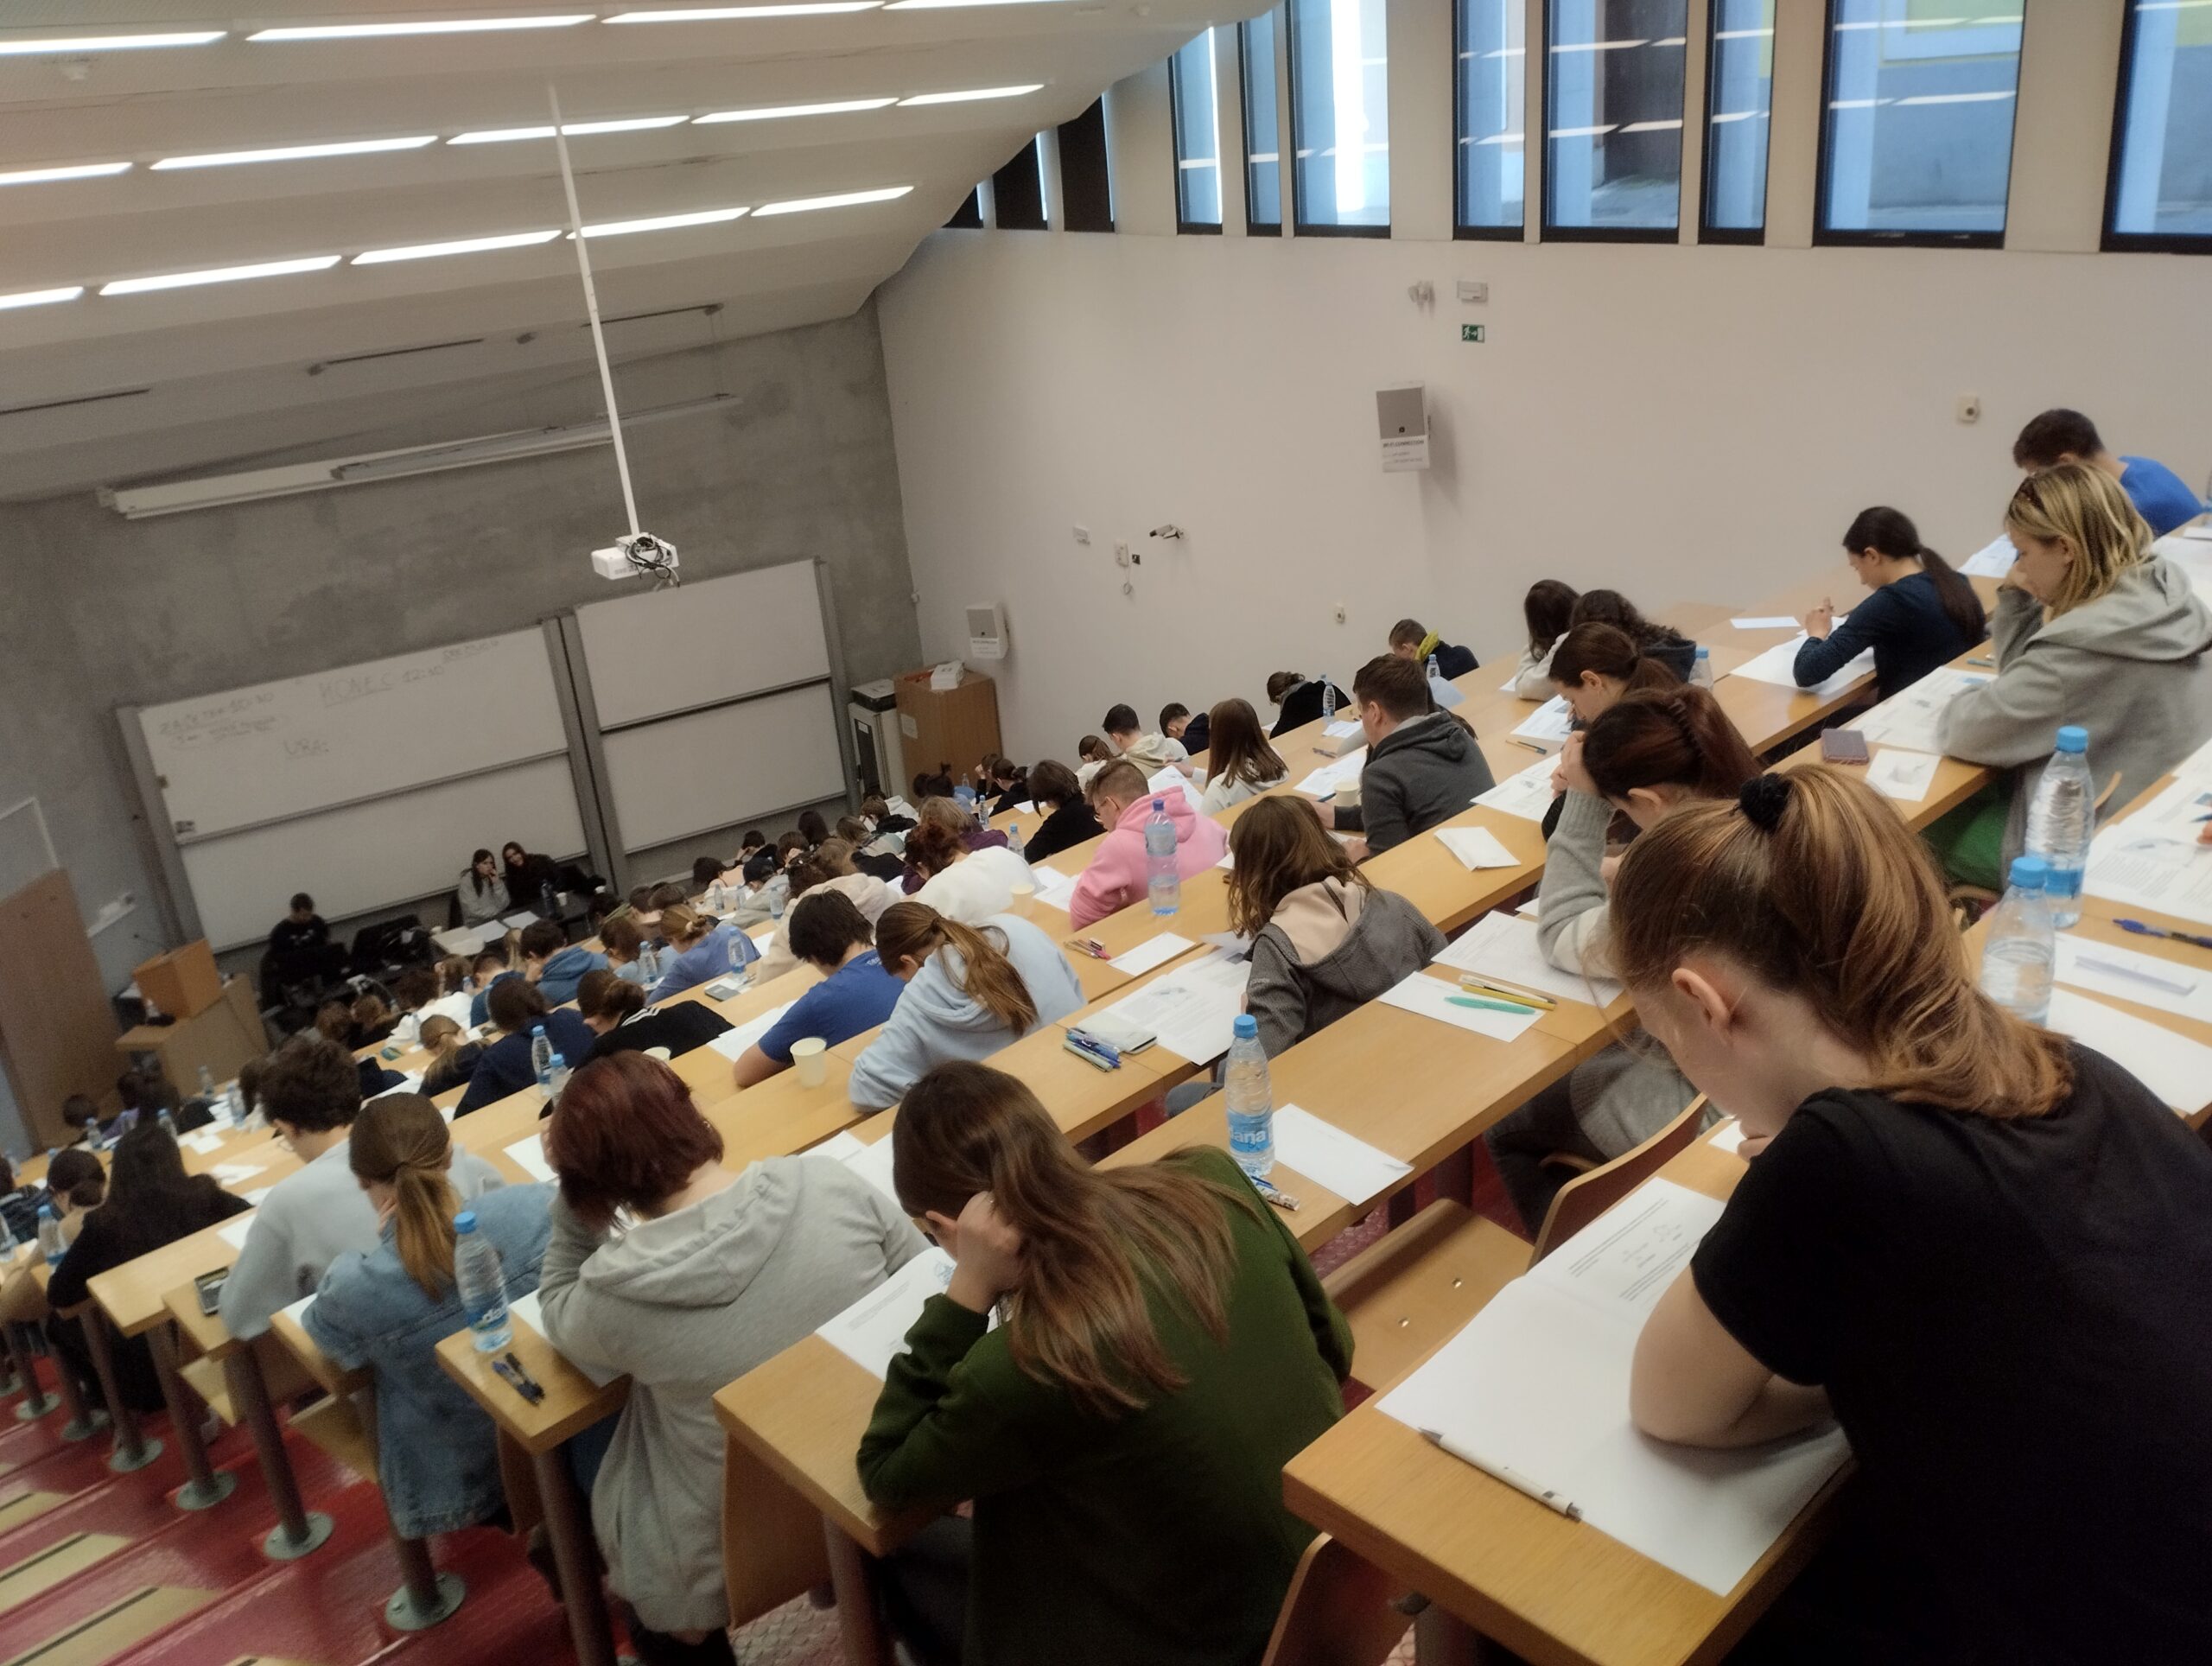 National Competition for Biology Students in Slovenia- Hosted by our friends at UP FAMNIT